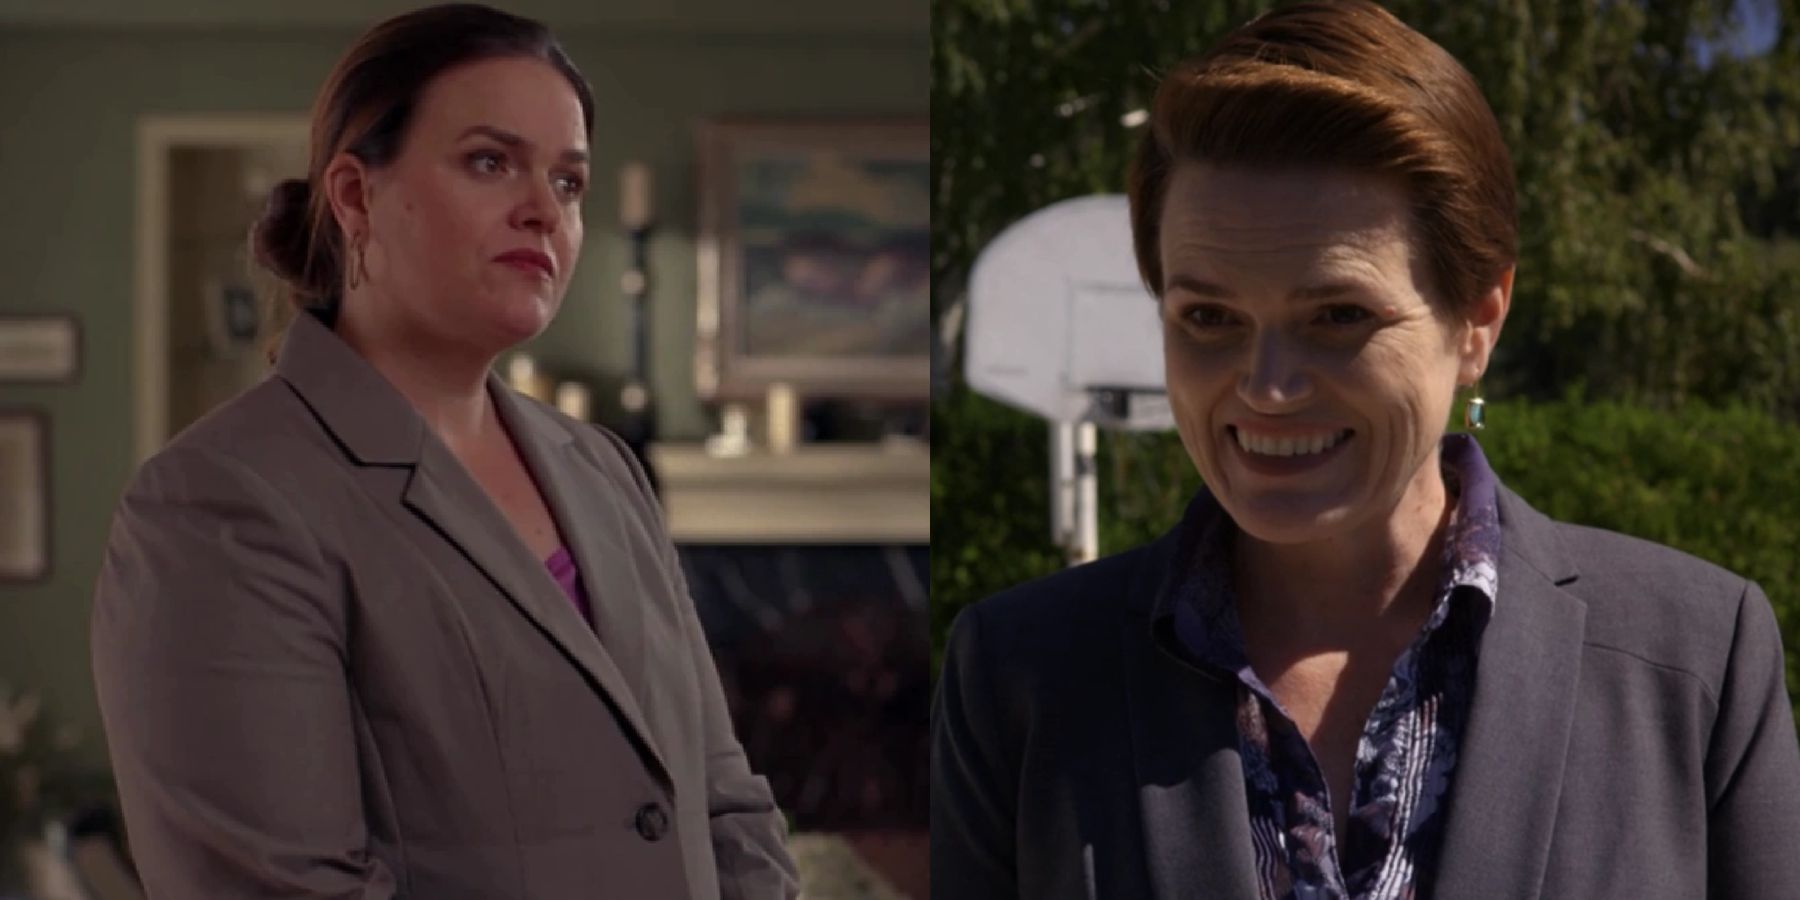 Jennifer Hasty as Stephanie Doswell in Breaking Bad and Better Call Saul